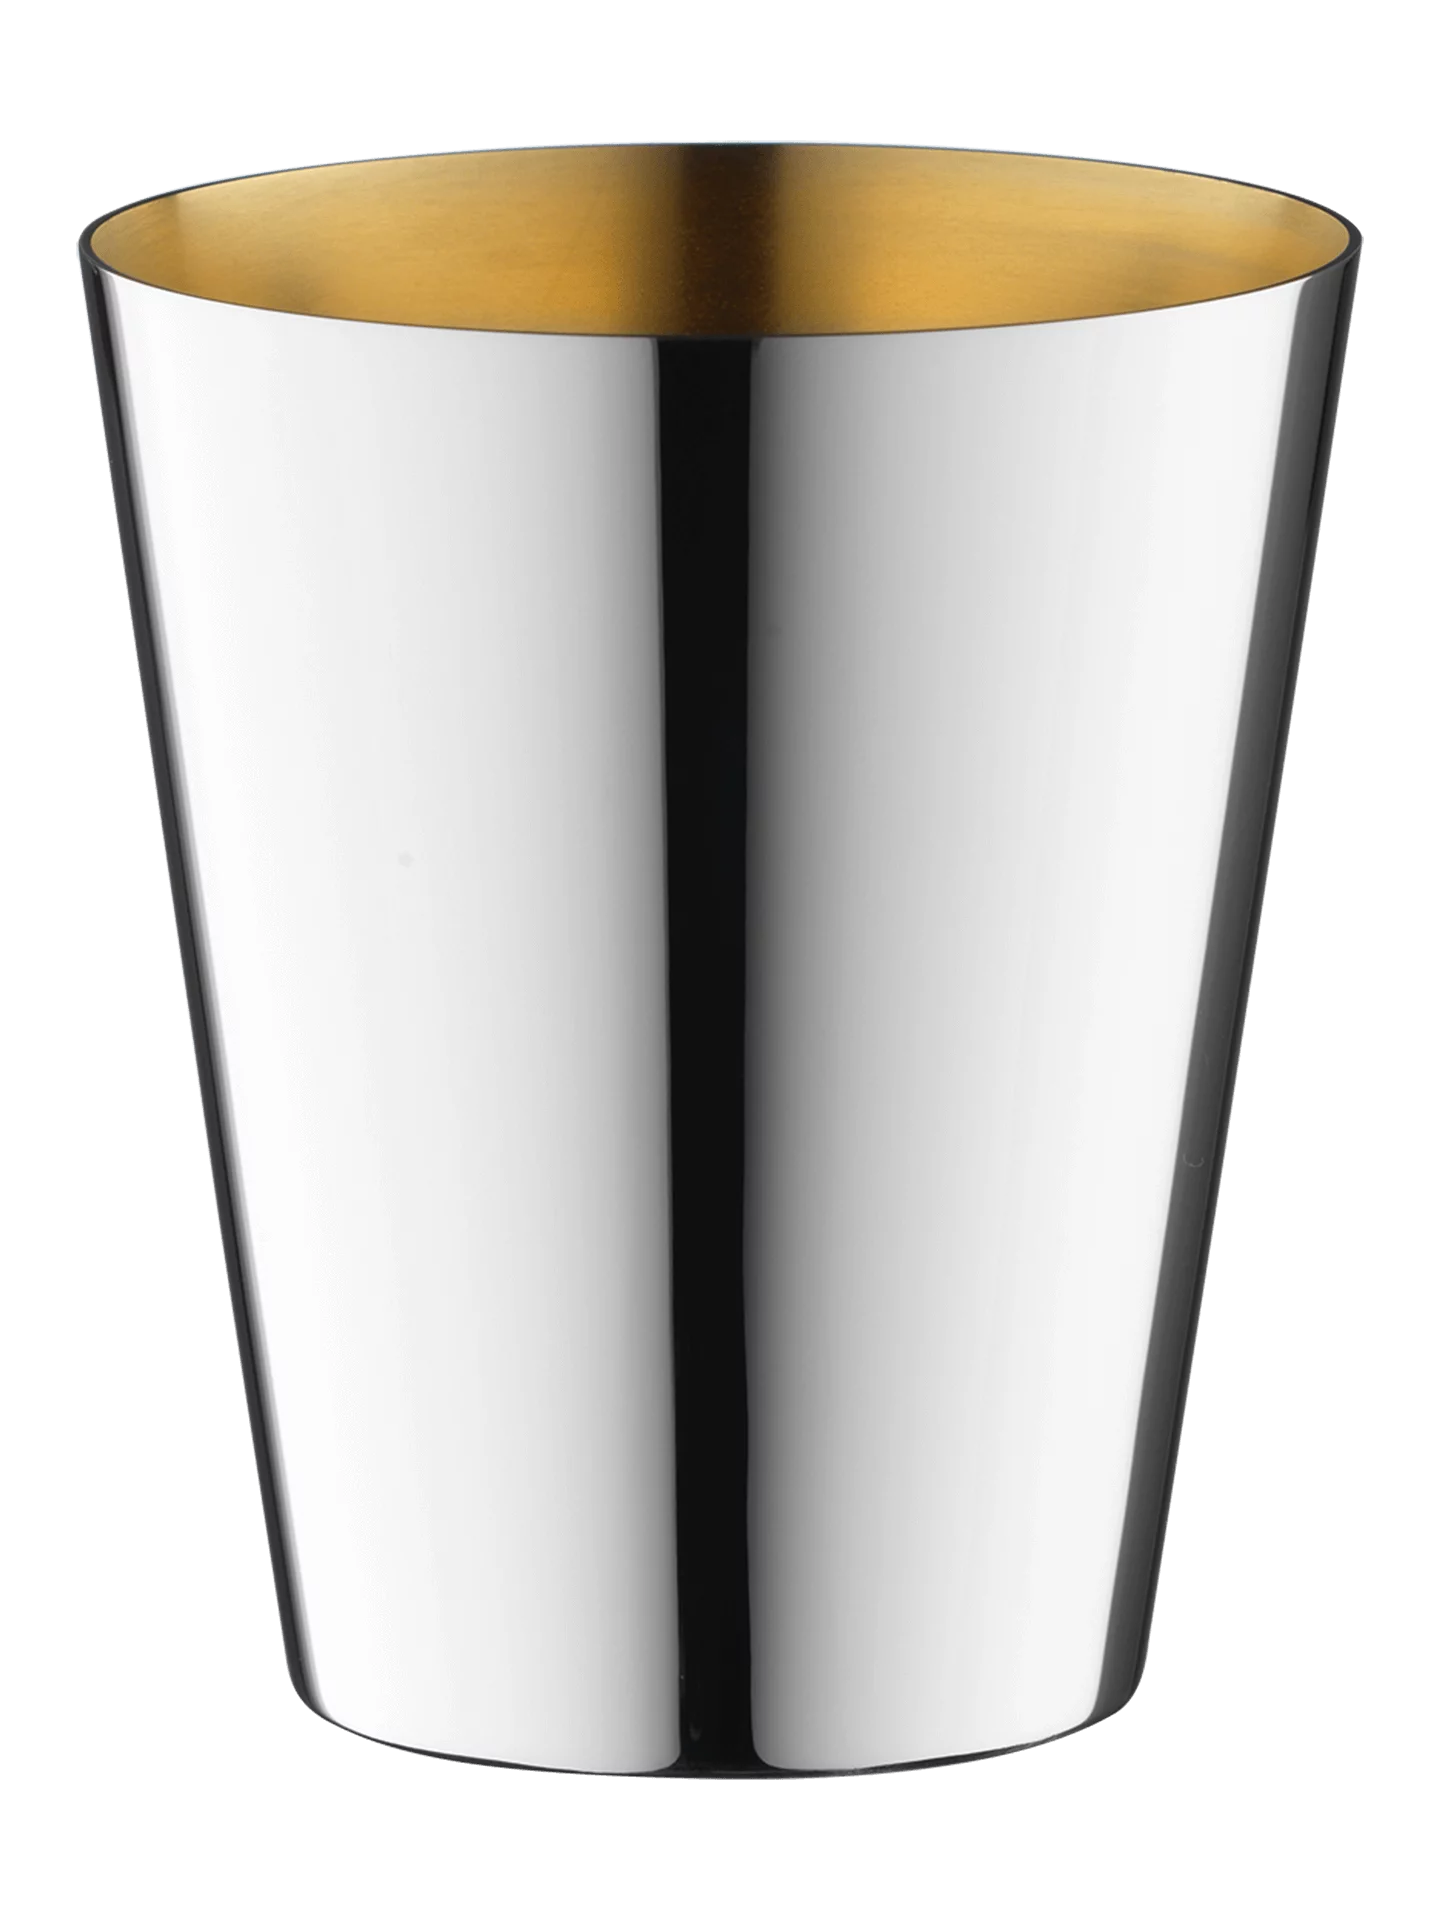 Dante Gin, water, wine tumbler, inside gold (90g silverplated, gold-plated inside)